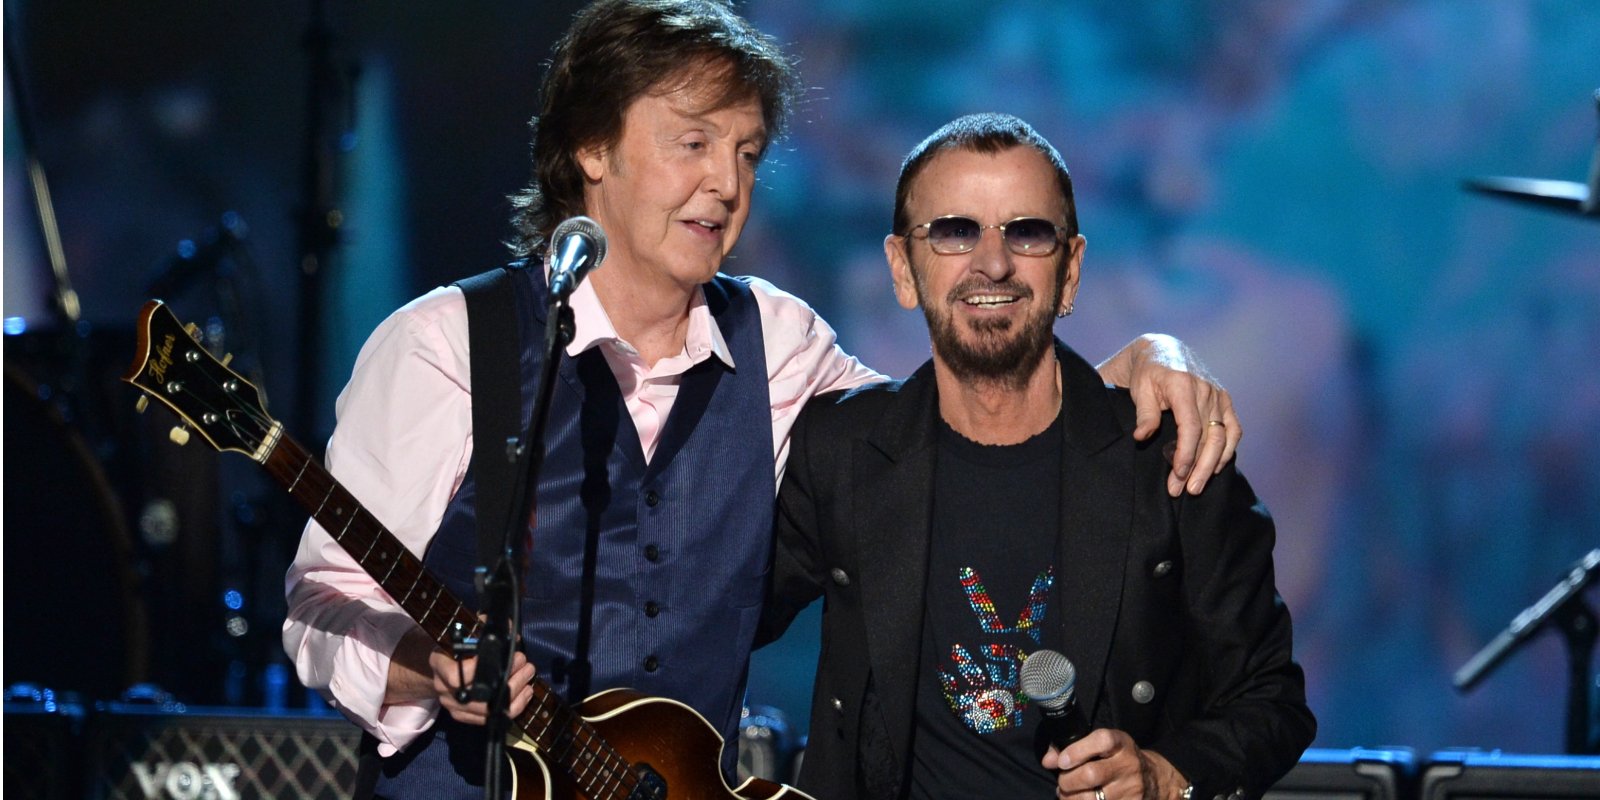 Paul McCartney and Ringo Starr pose together on stage.